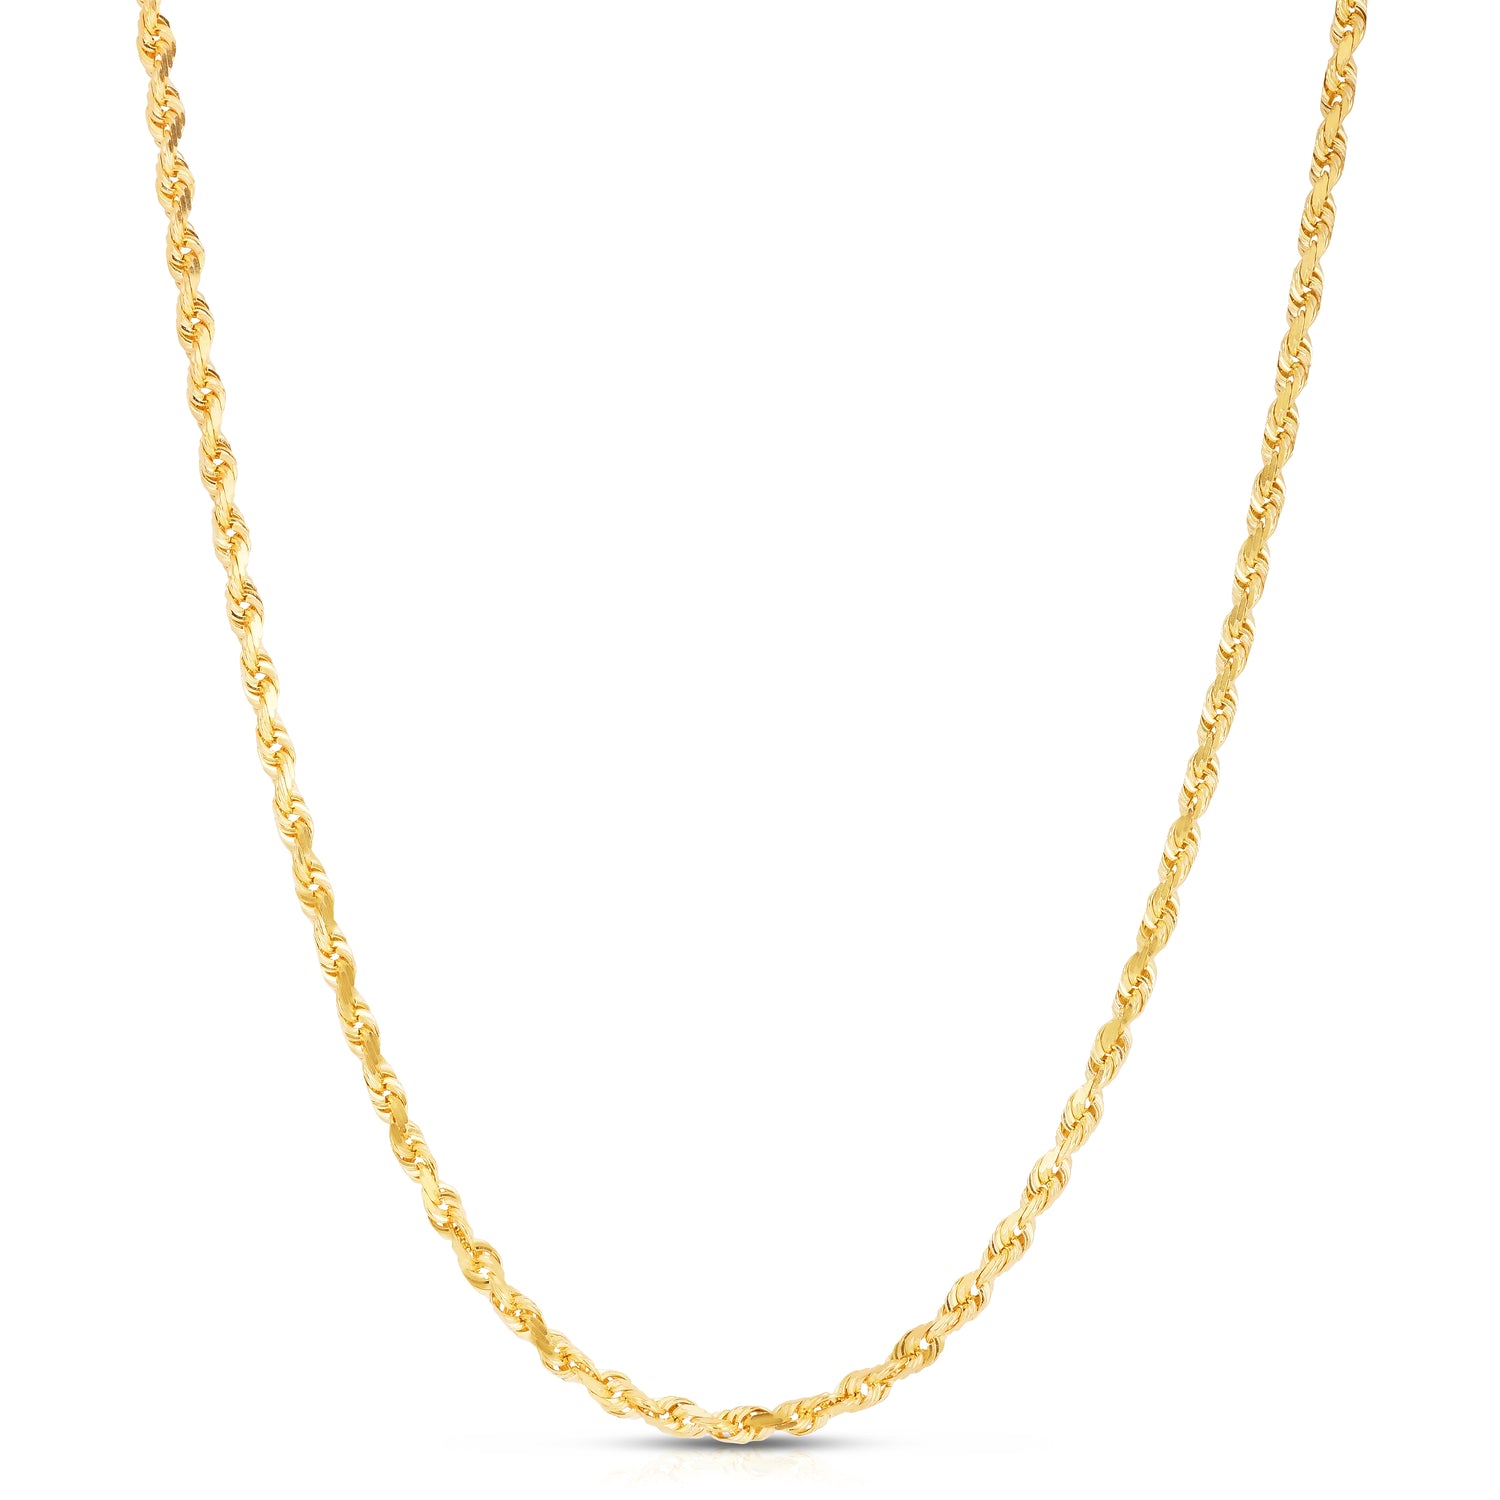 10k Yellow Gold 3.5mm Solid Diamond Cut Rope Chain Necklace